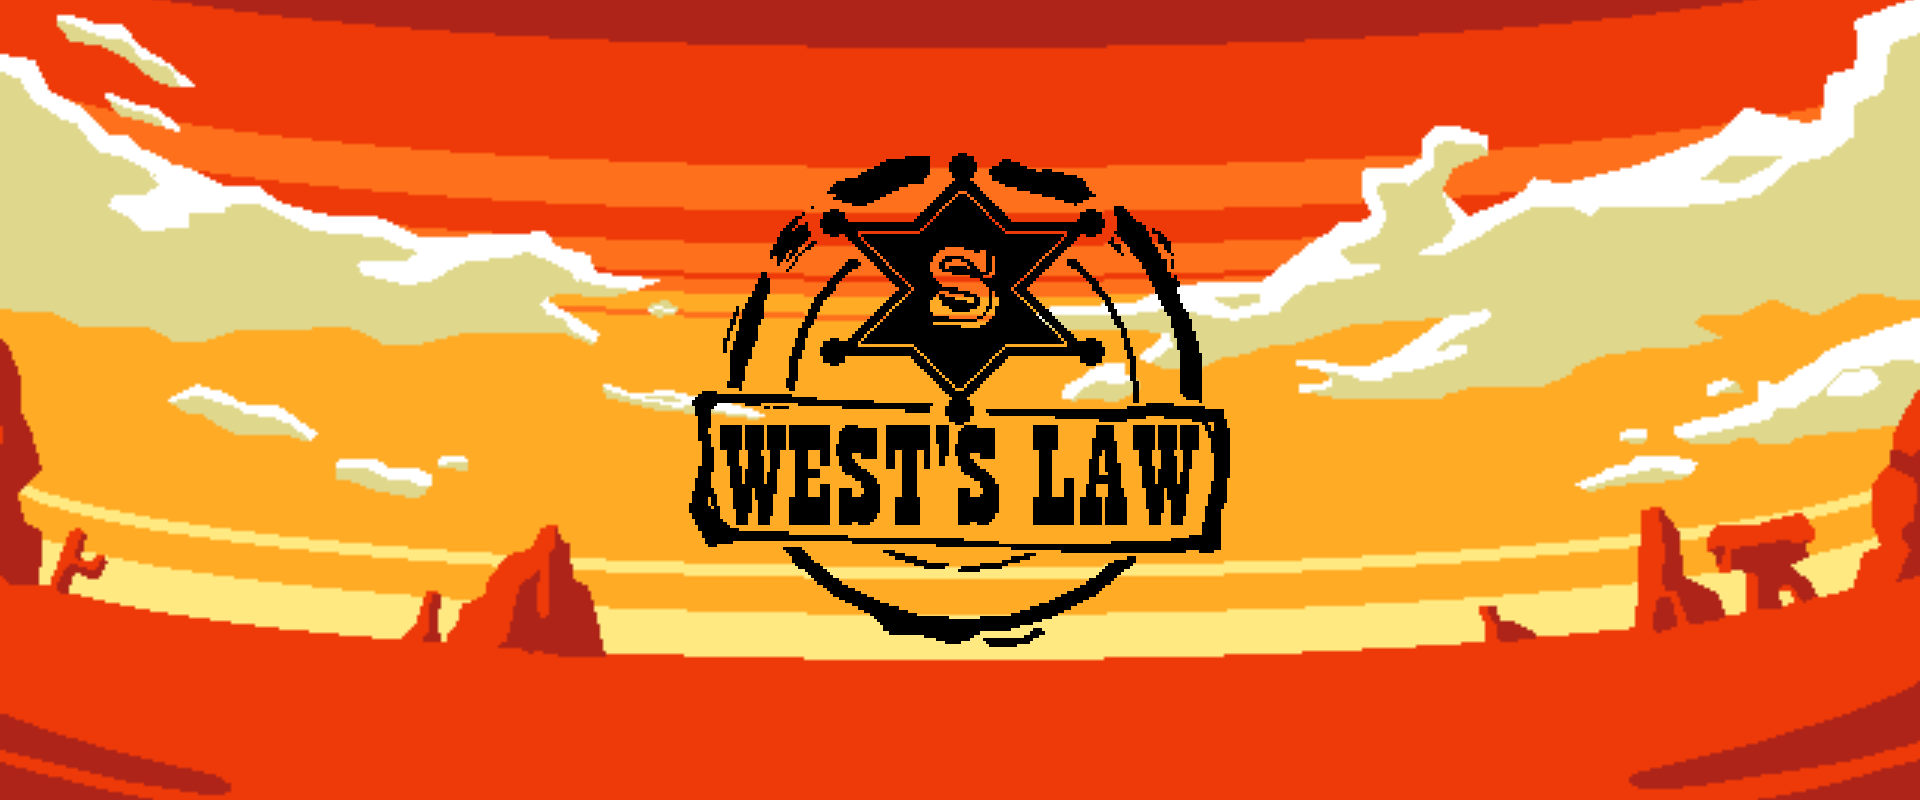 West's Law